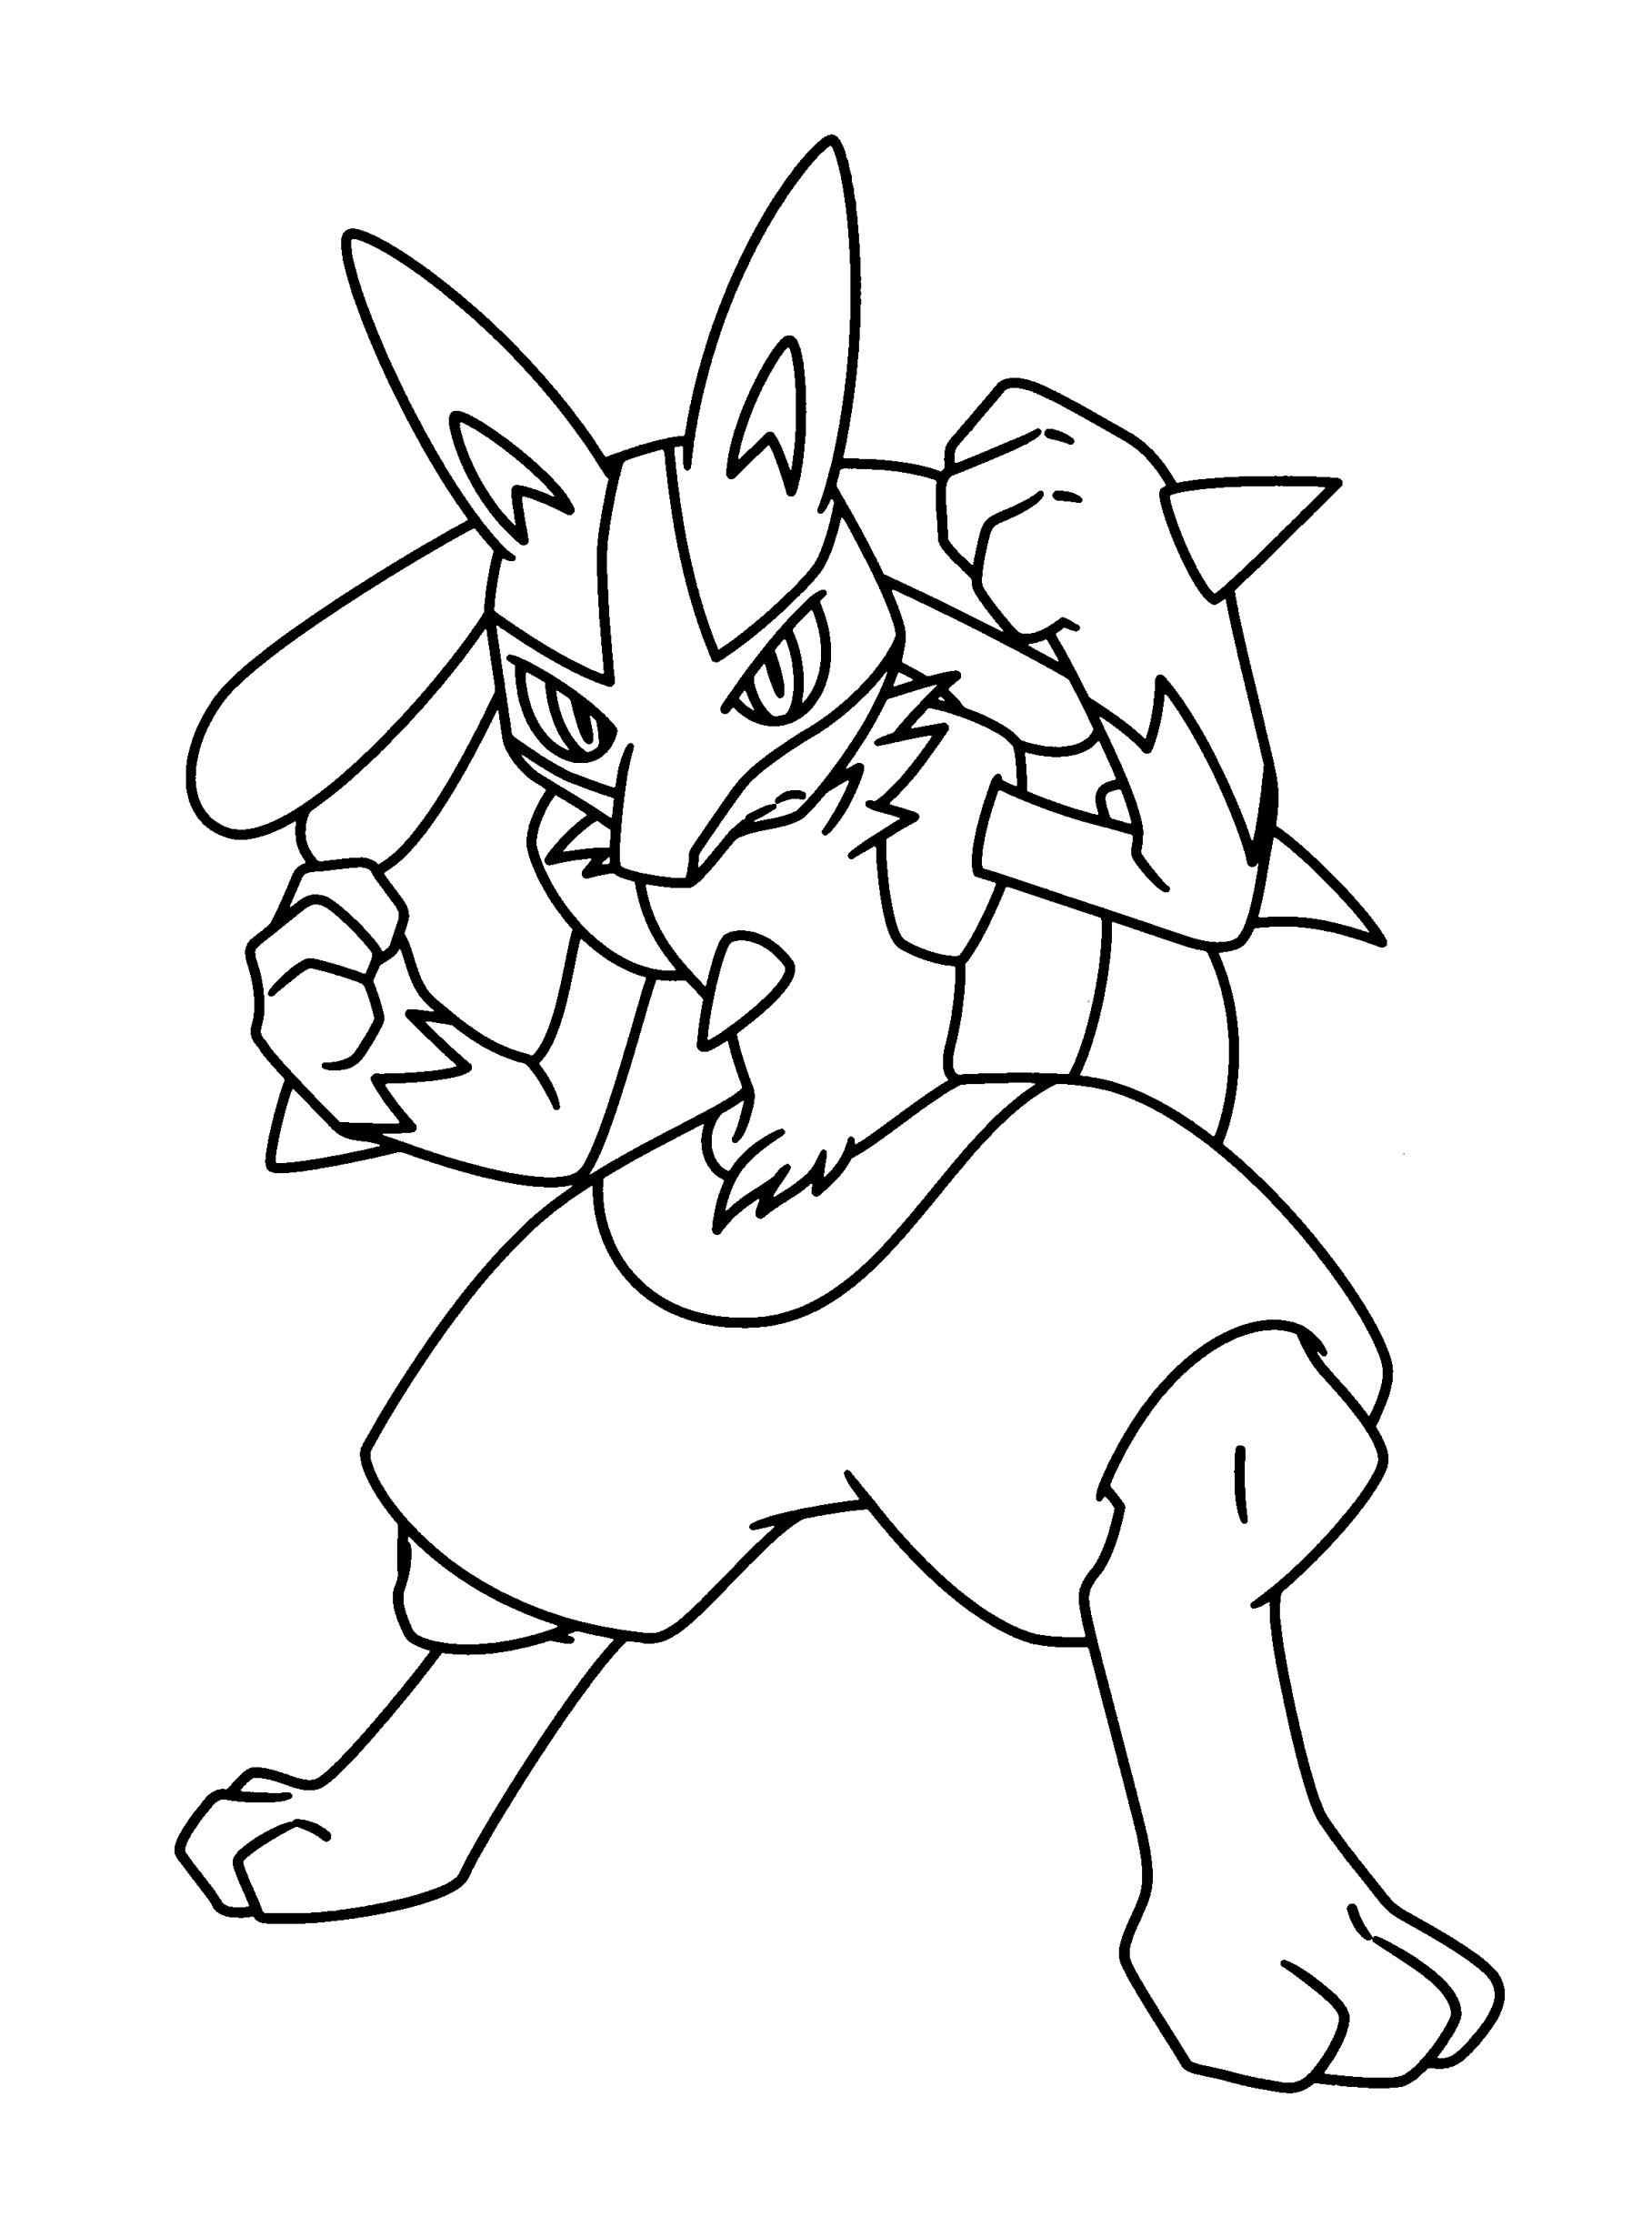 Fabulous Pokemon Coloring Pages Lucario 99 In with Pokemon Coloring Pages Lucario